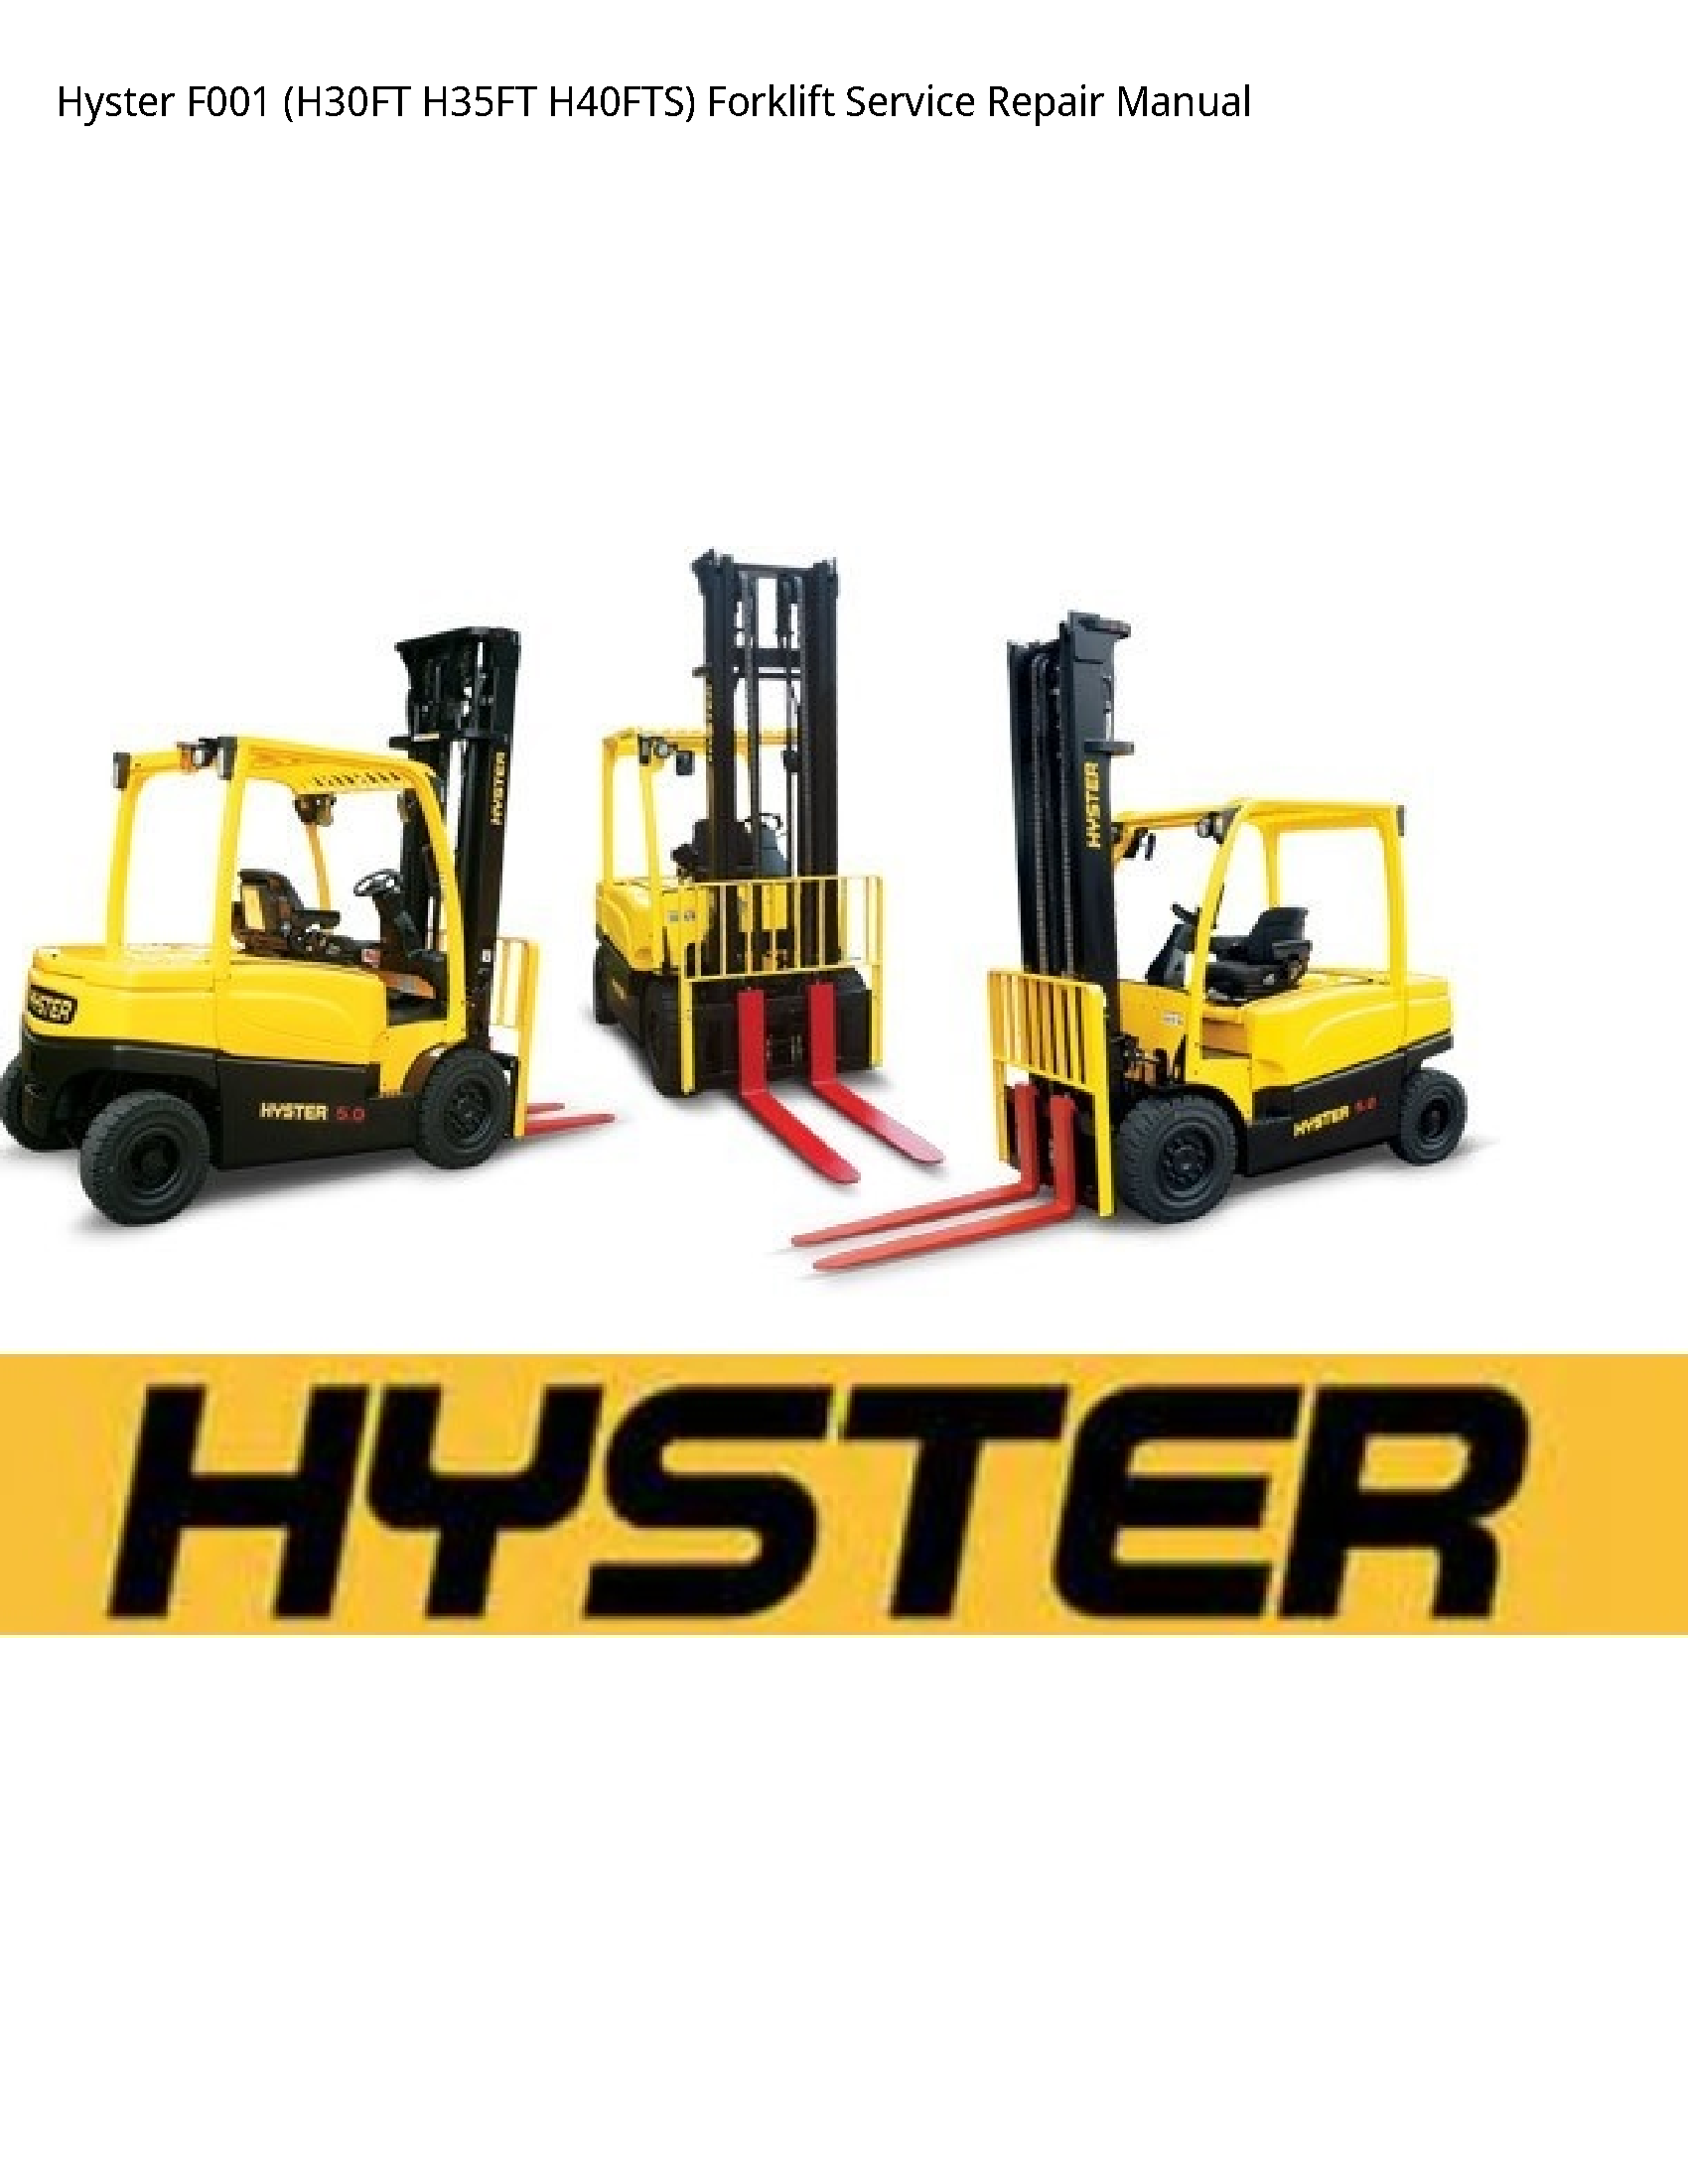 Hyster F001 Forklift manual